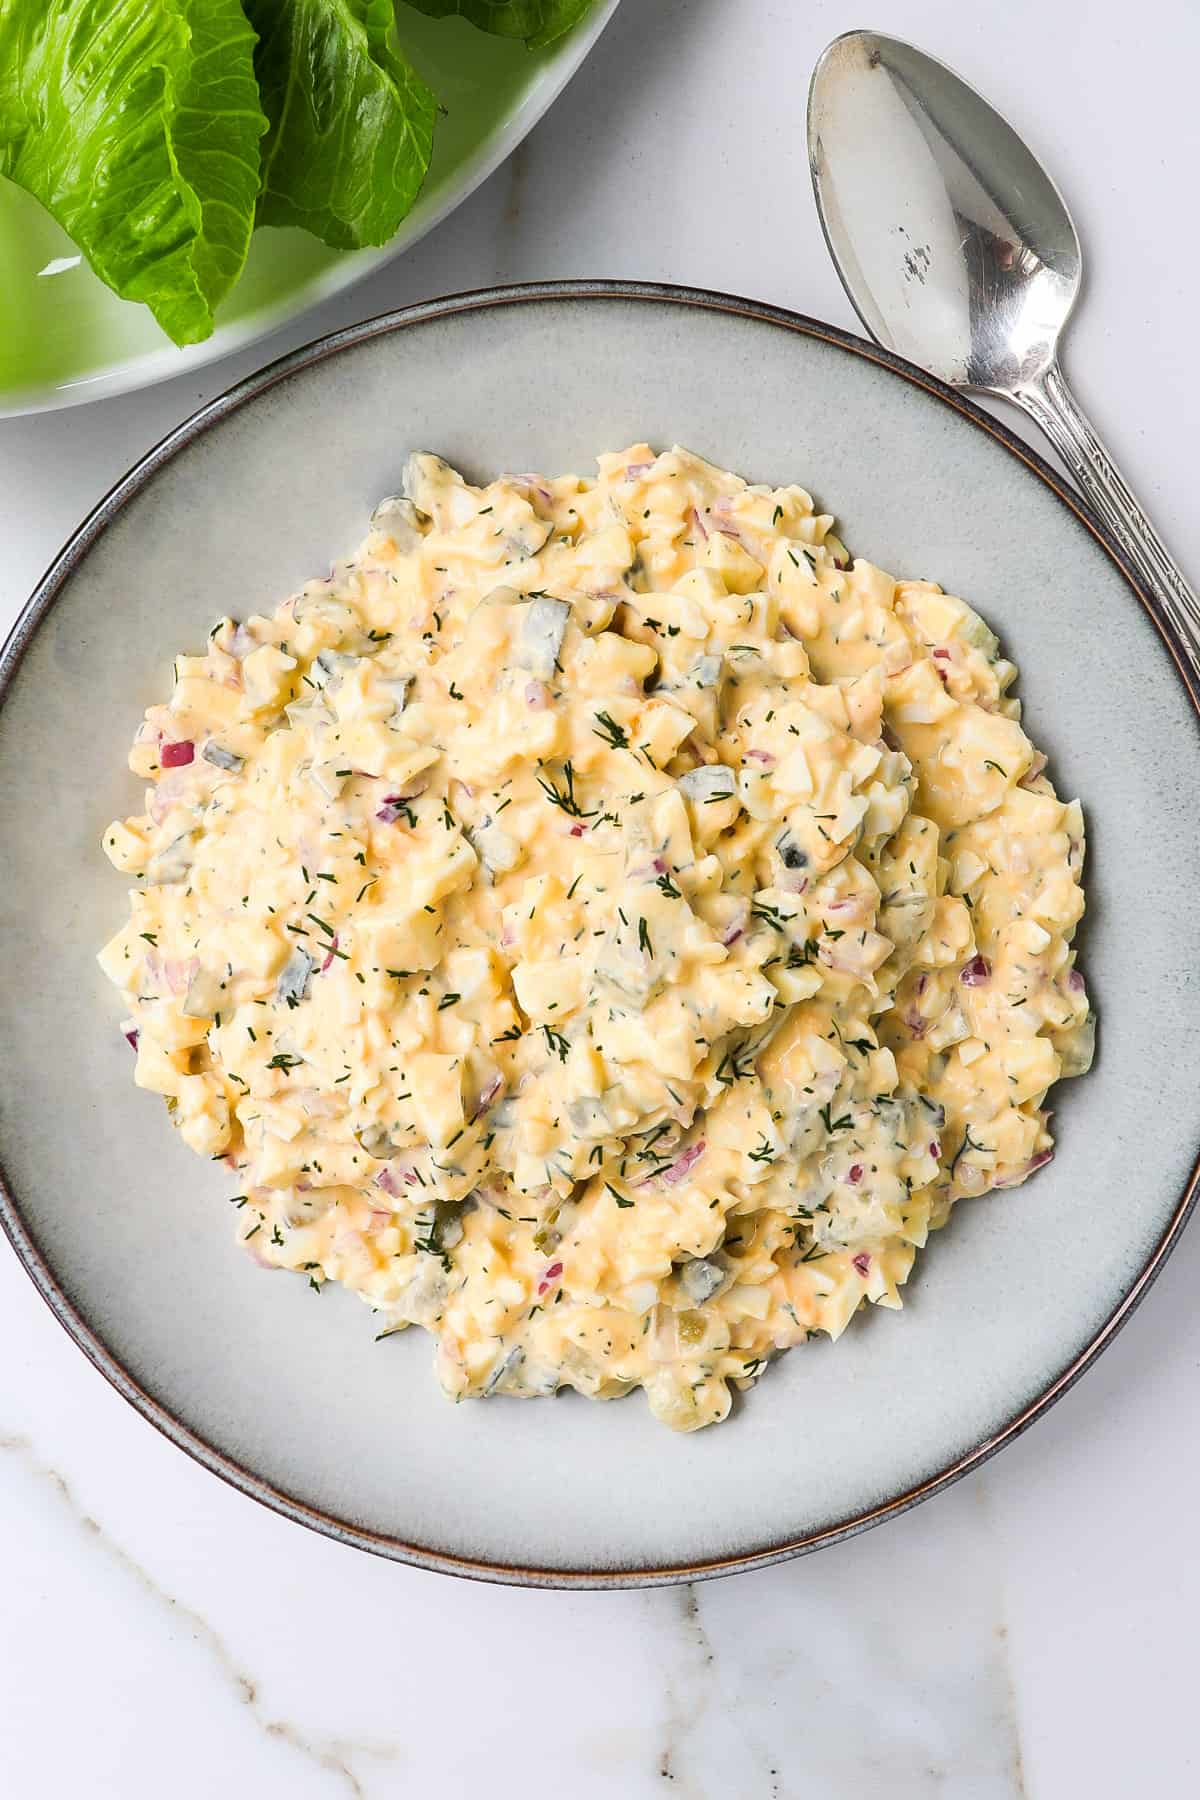 Egg salad in a bowl with silver spoon on the side.